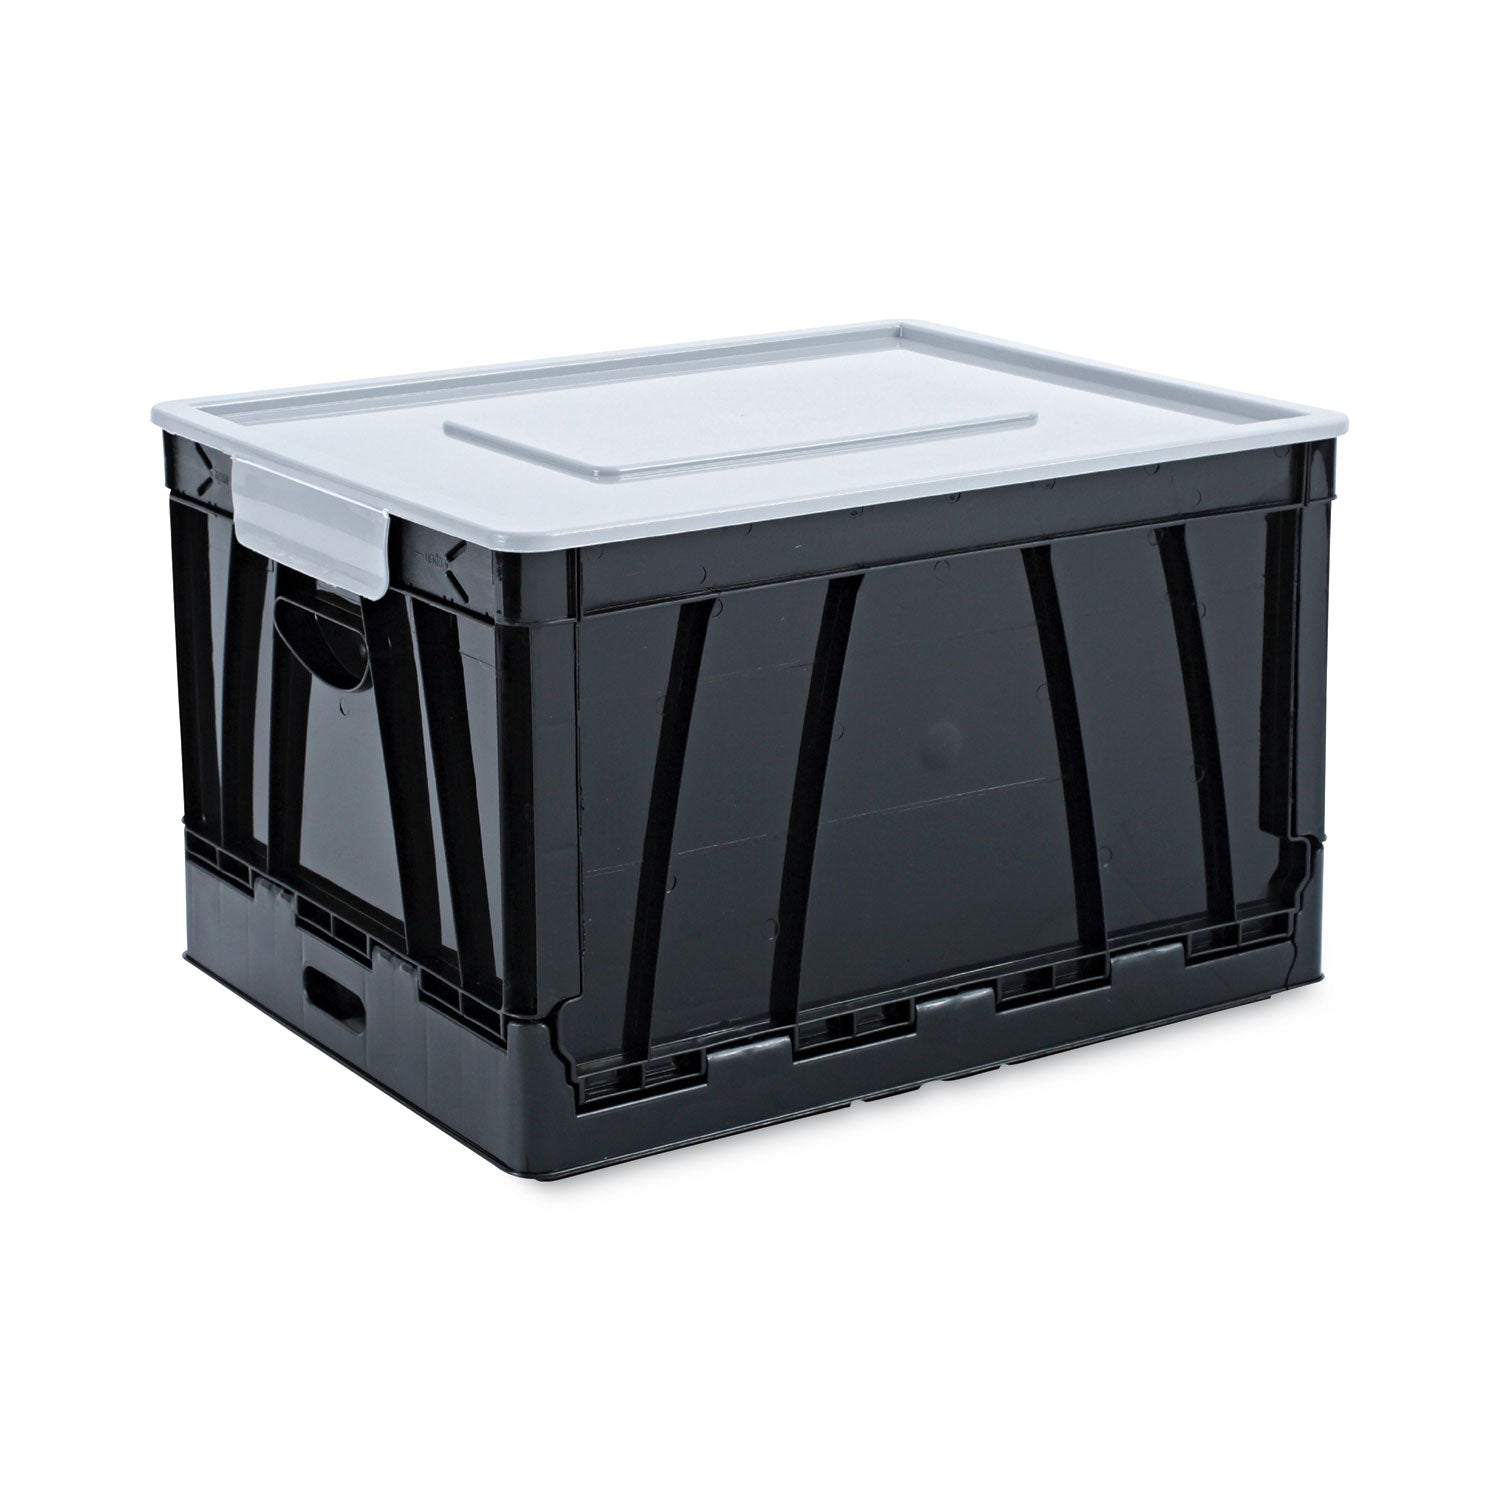 collapsible-crate-letter-legal-files-1725-x-1425-x-105-black-gray-2-pack_unv40010 - 1